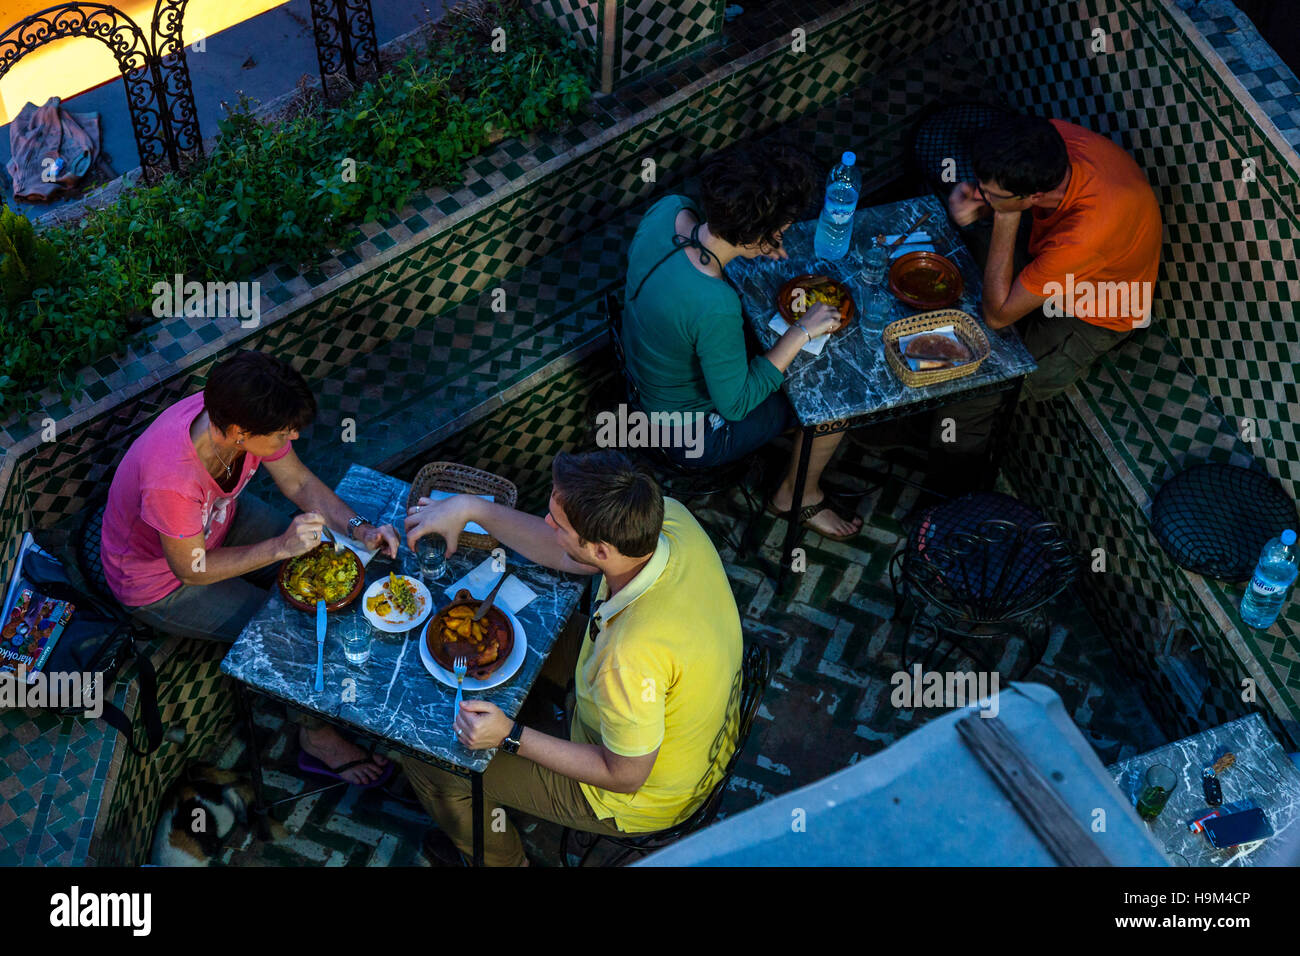 Tourists Eating Traditional Moroccan Food On A Rooftop Restaurant Terrace, Fez el Bali, Fez, Morocco Stock Photo